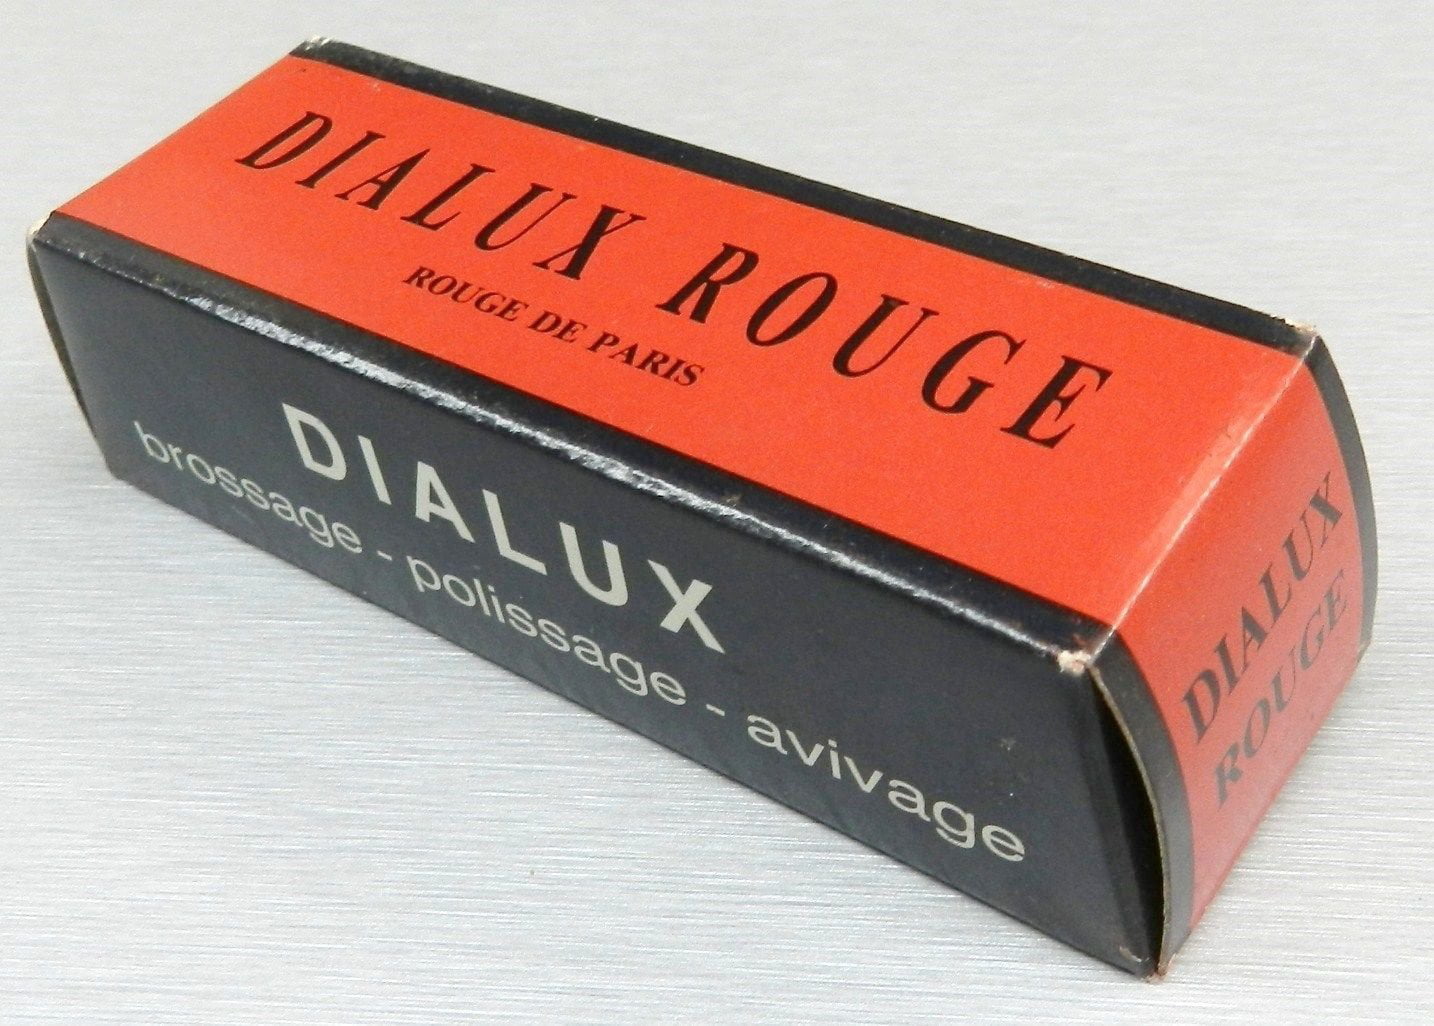 Metal Rouge Polishing Compounds for Hard Metals Dialux 4 Grades Extreme Buffing 